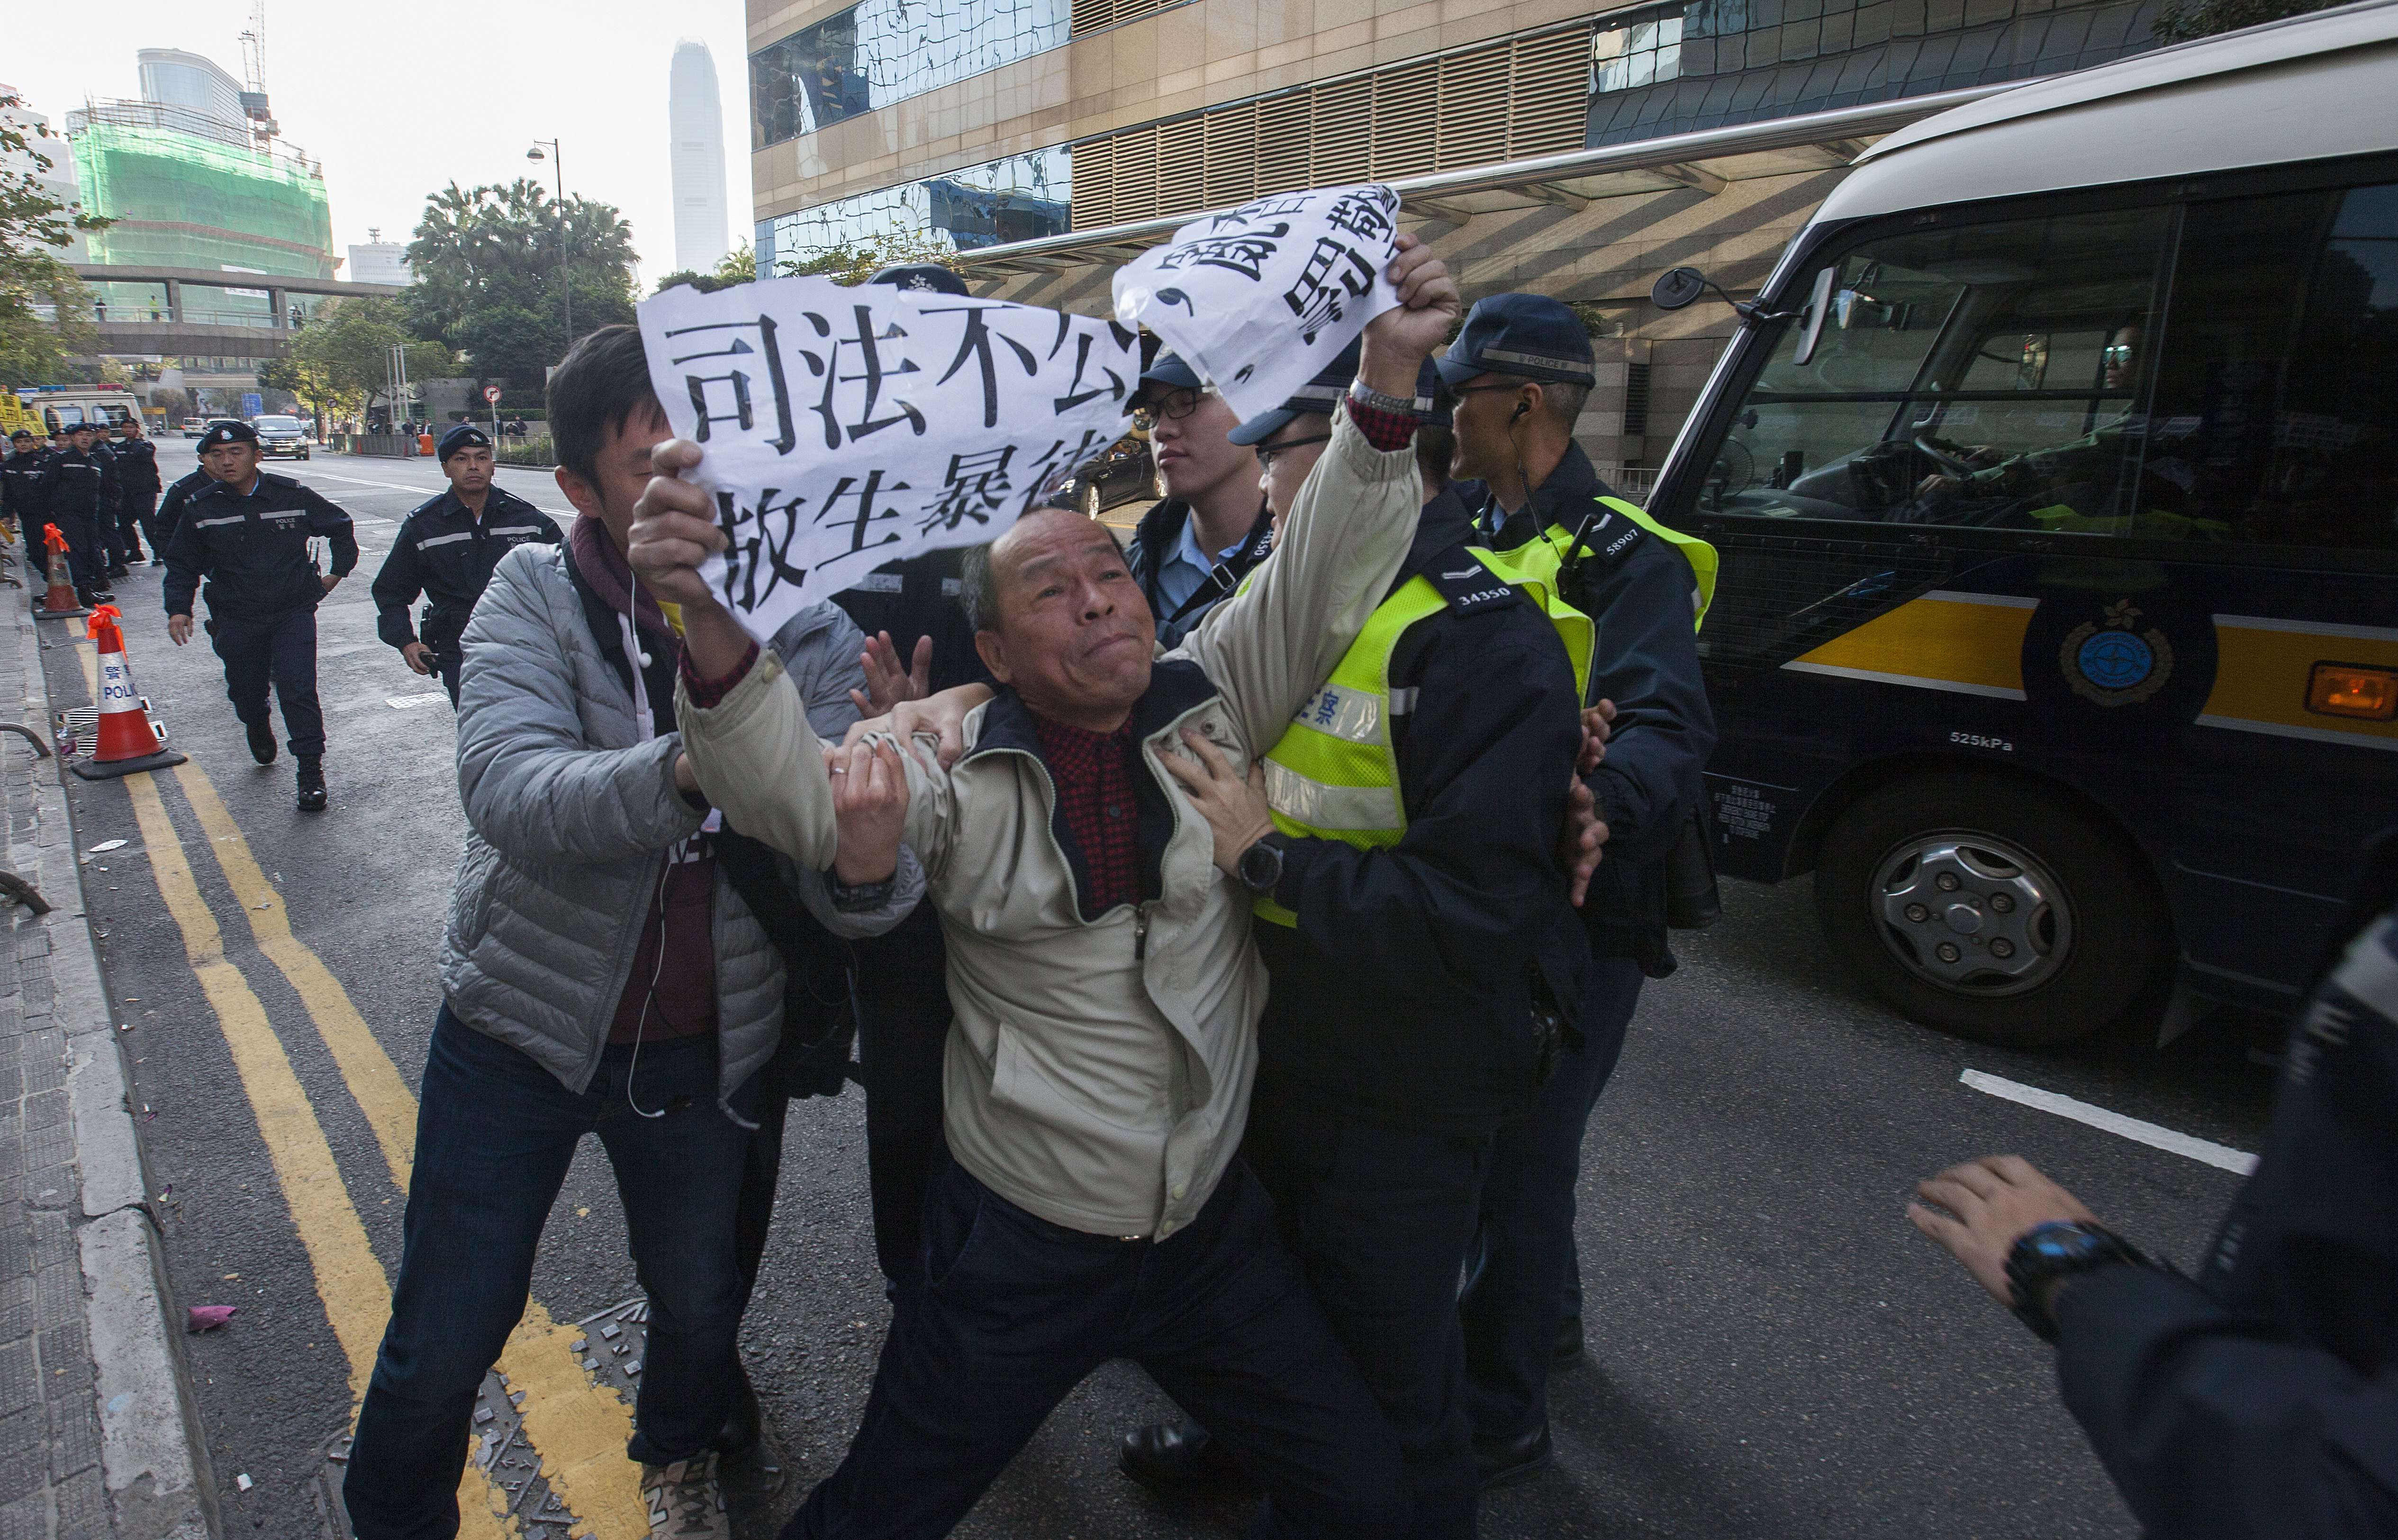 A protester objects to the conviction of the seven police officers for assaulting an Occupy protester. Photo: EPA